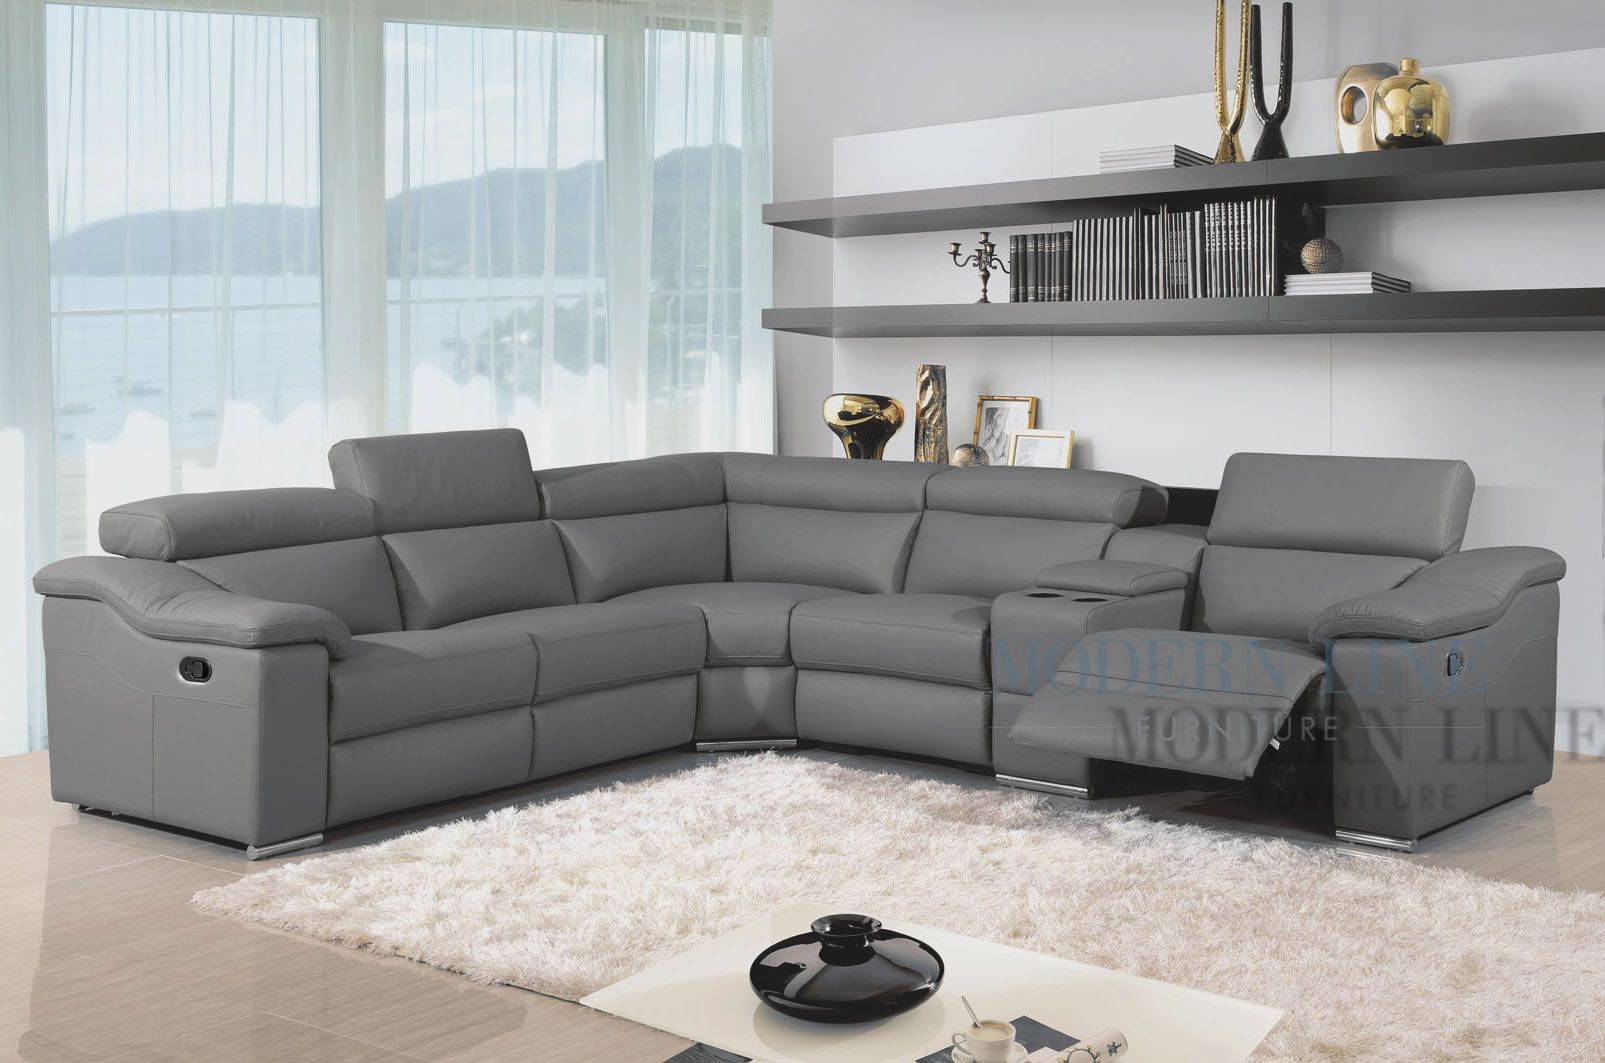 Modern Leather Reclining Sectional Grey leather modern sectional